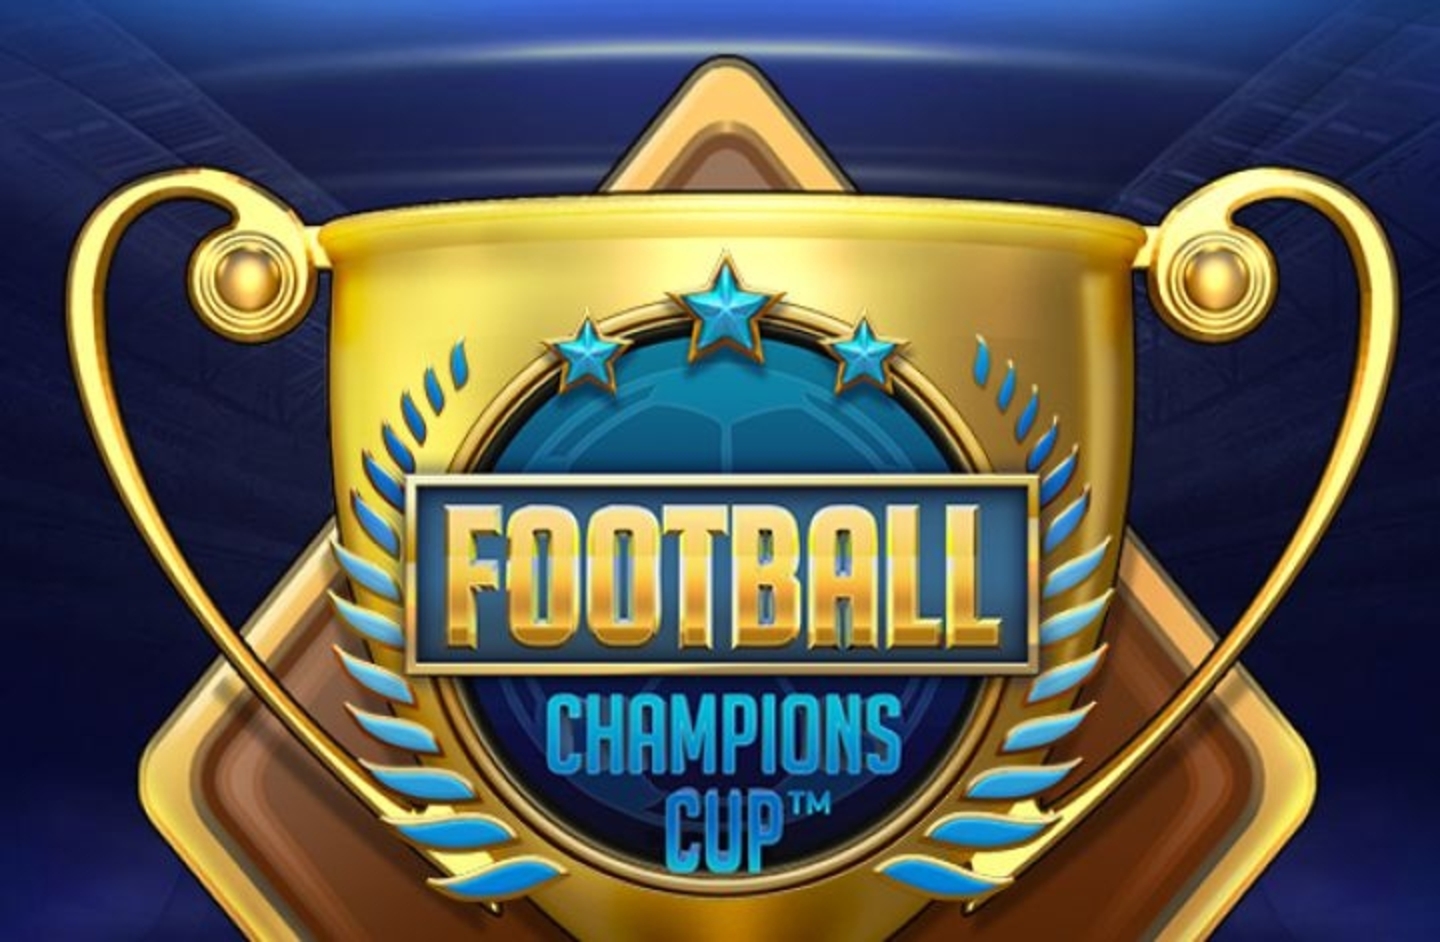 Football: Champions Cup demo